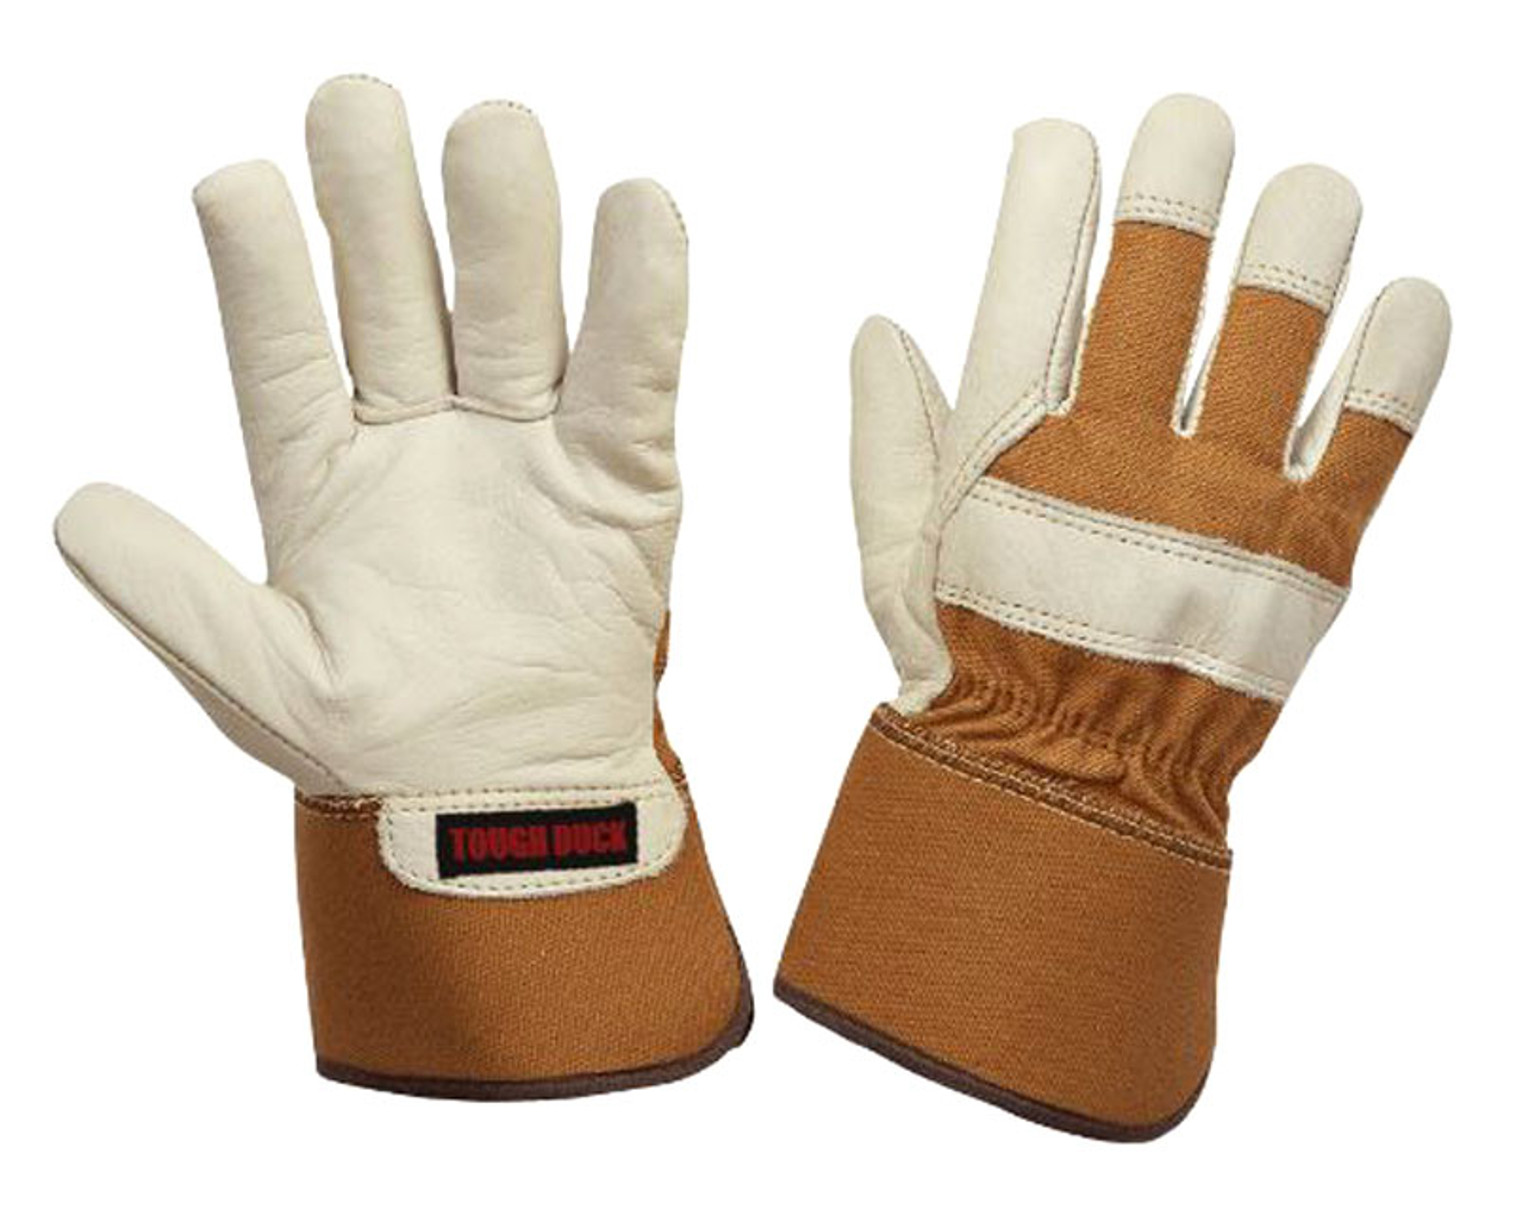 Women’s 3M Thinsulate Lined Cowgrain Fitters Glove (Cream) -5 Pack